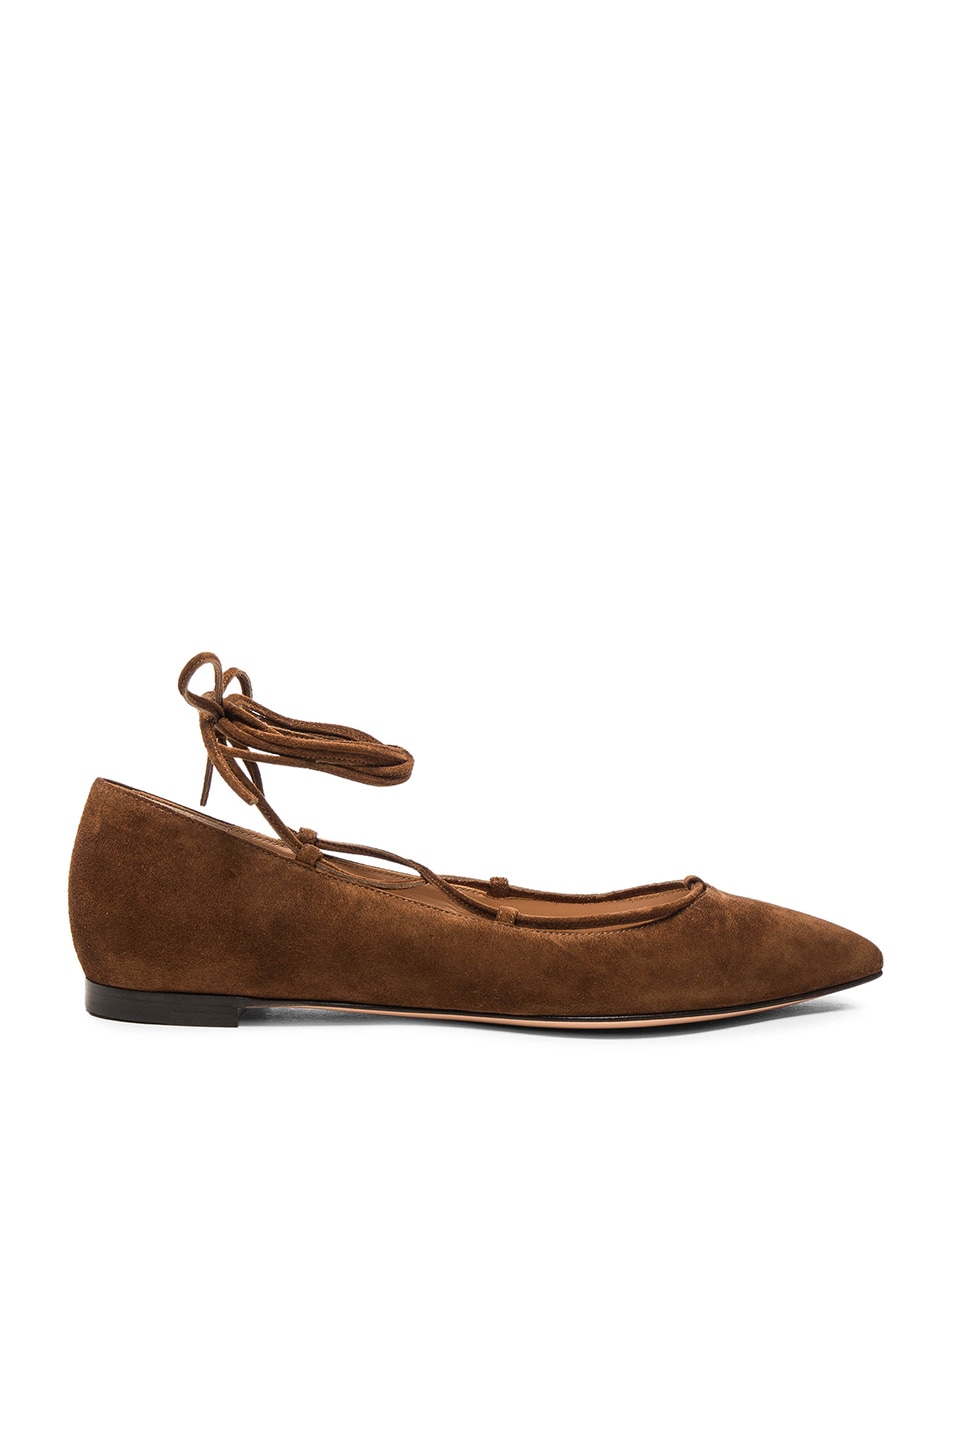 Image 1 of Gianvito Rossi Suede Lace Up Flats in Texas